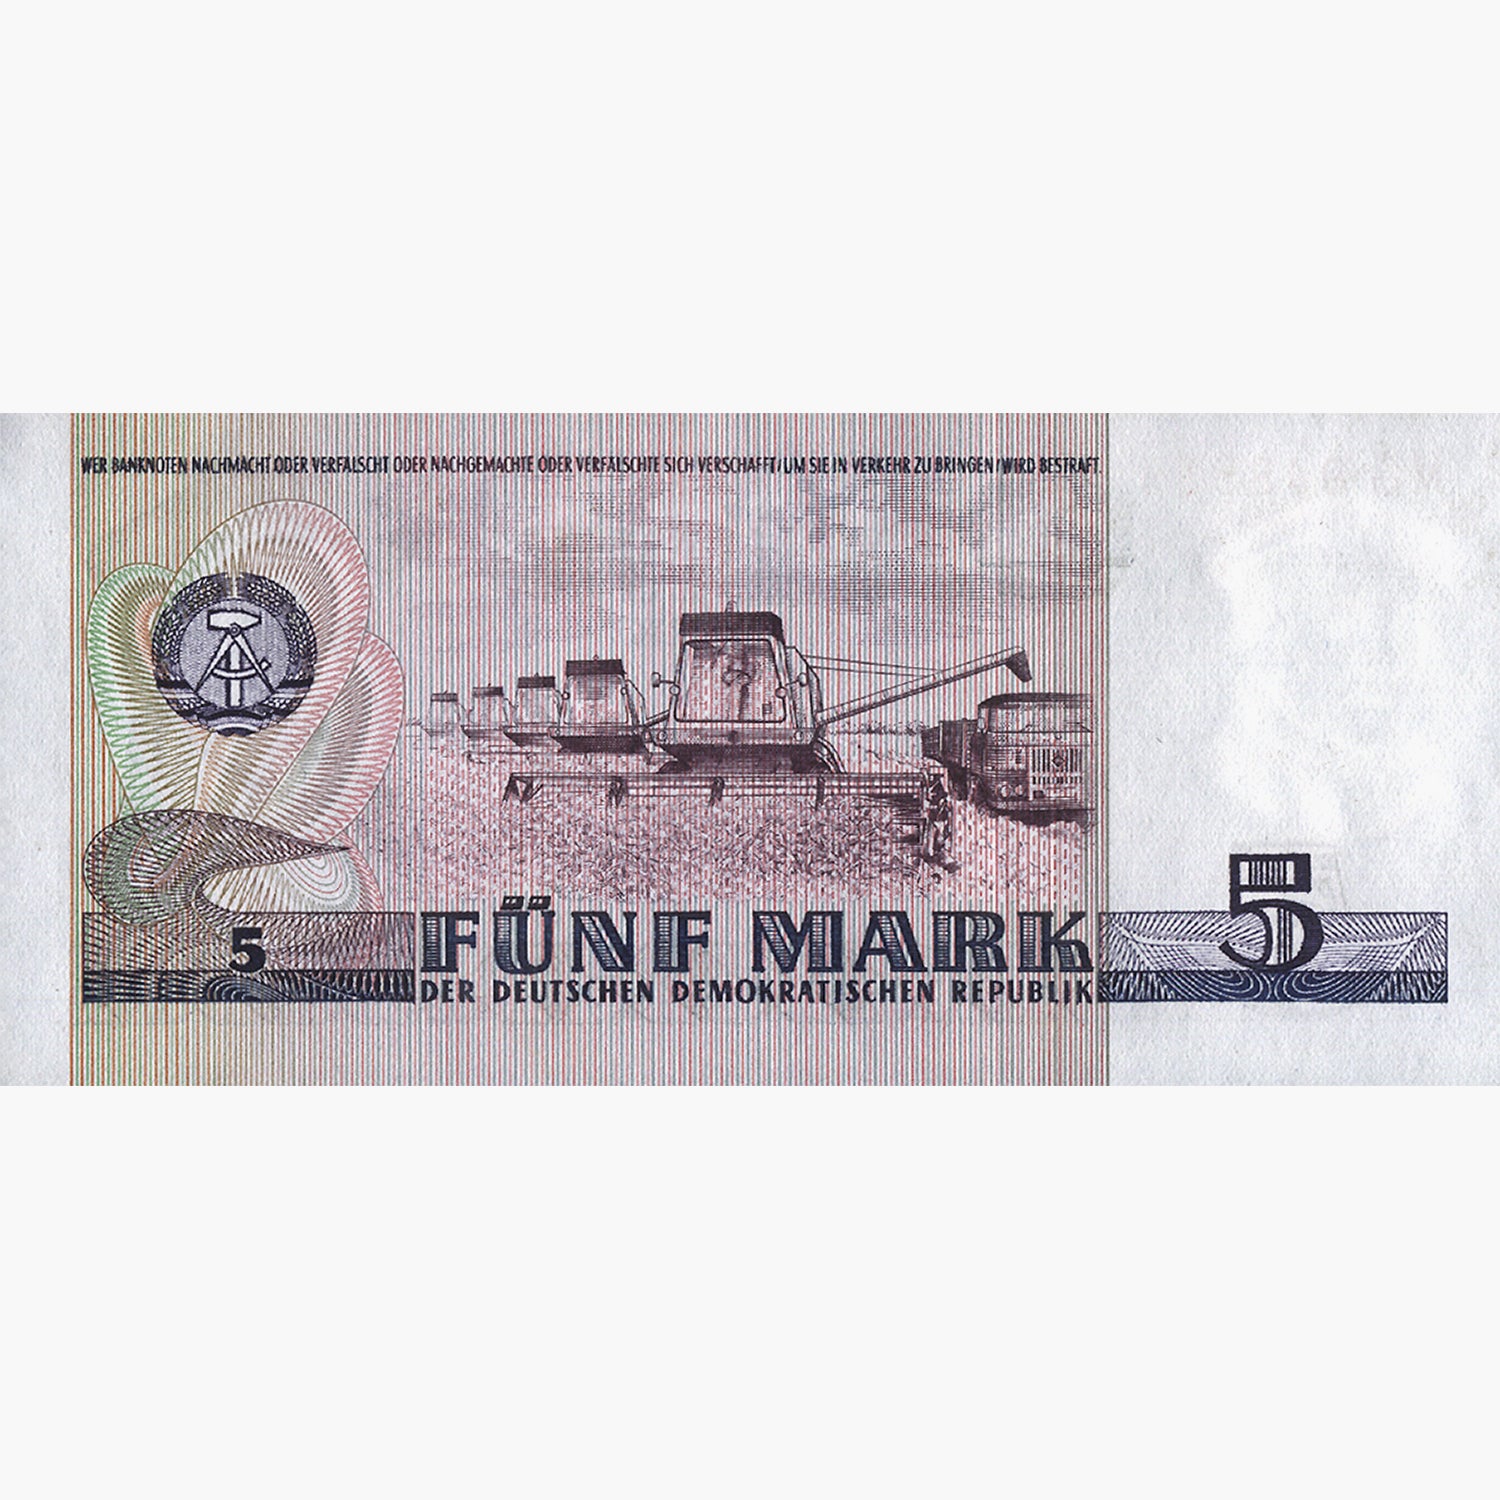 Banknote Collection "Former Countries"